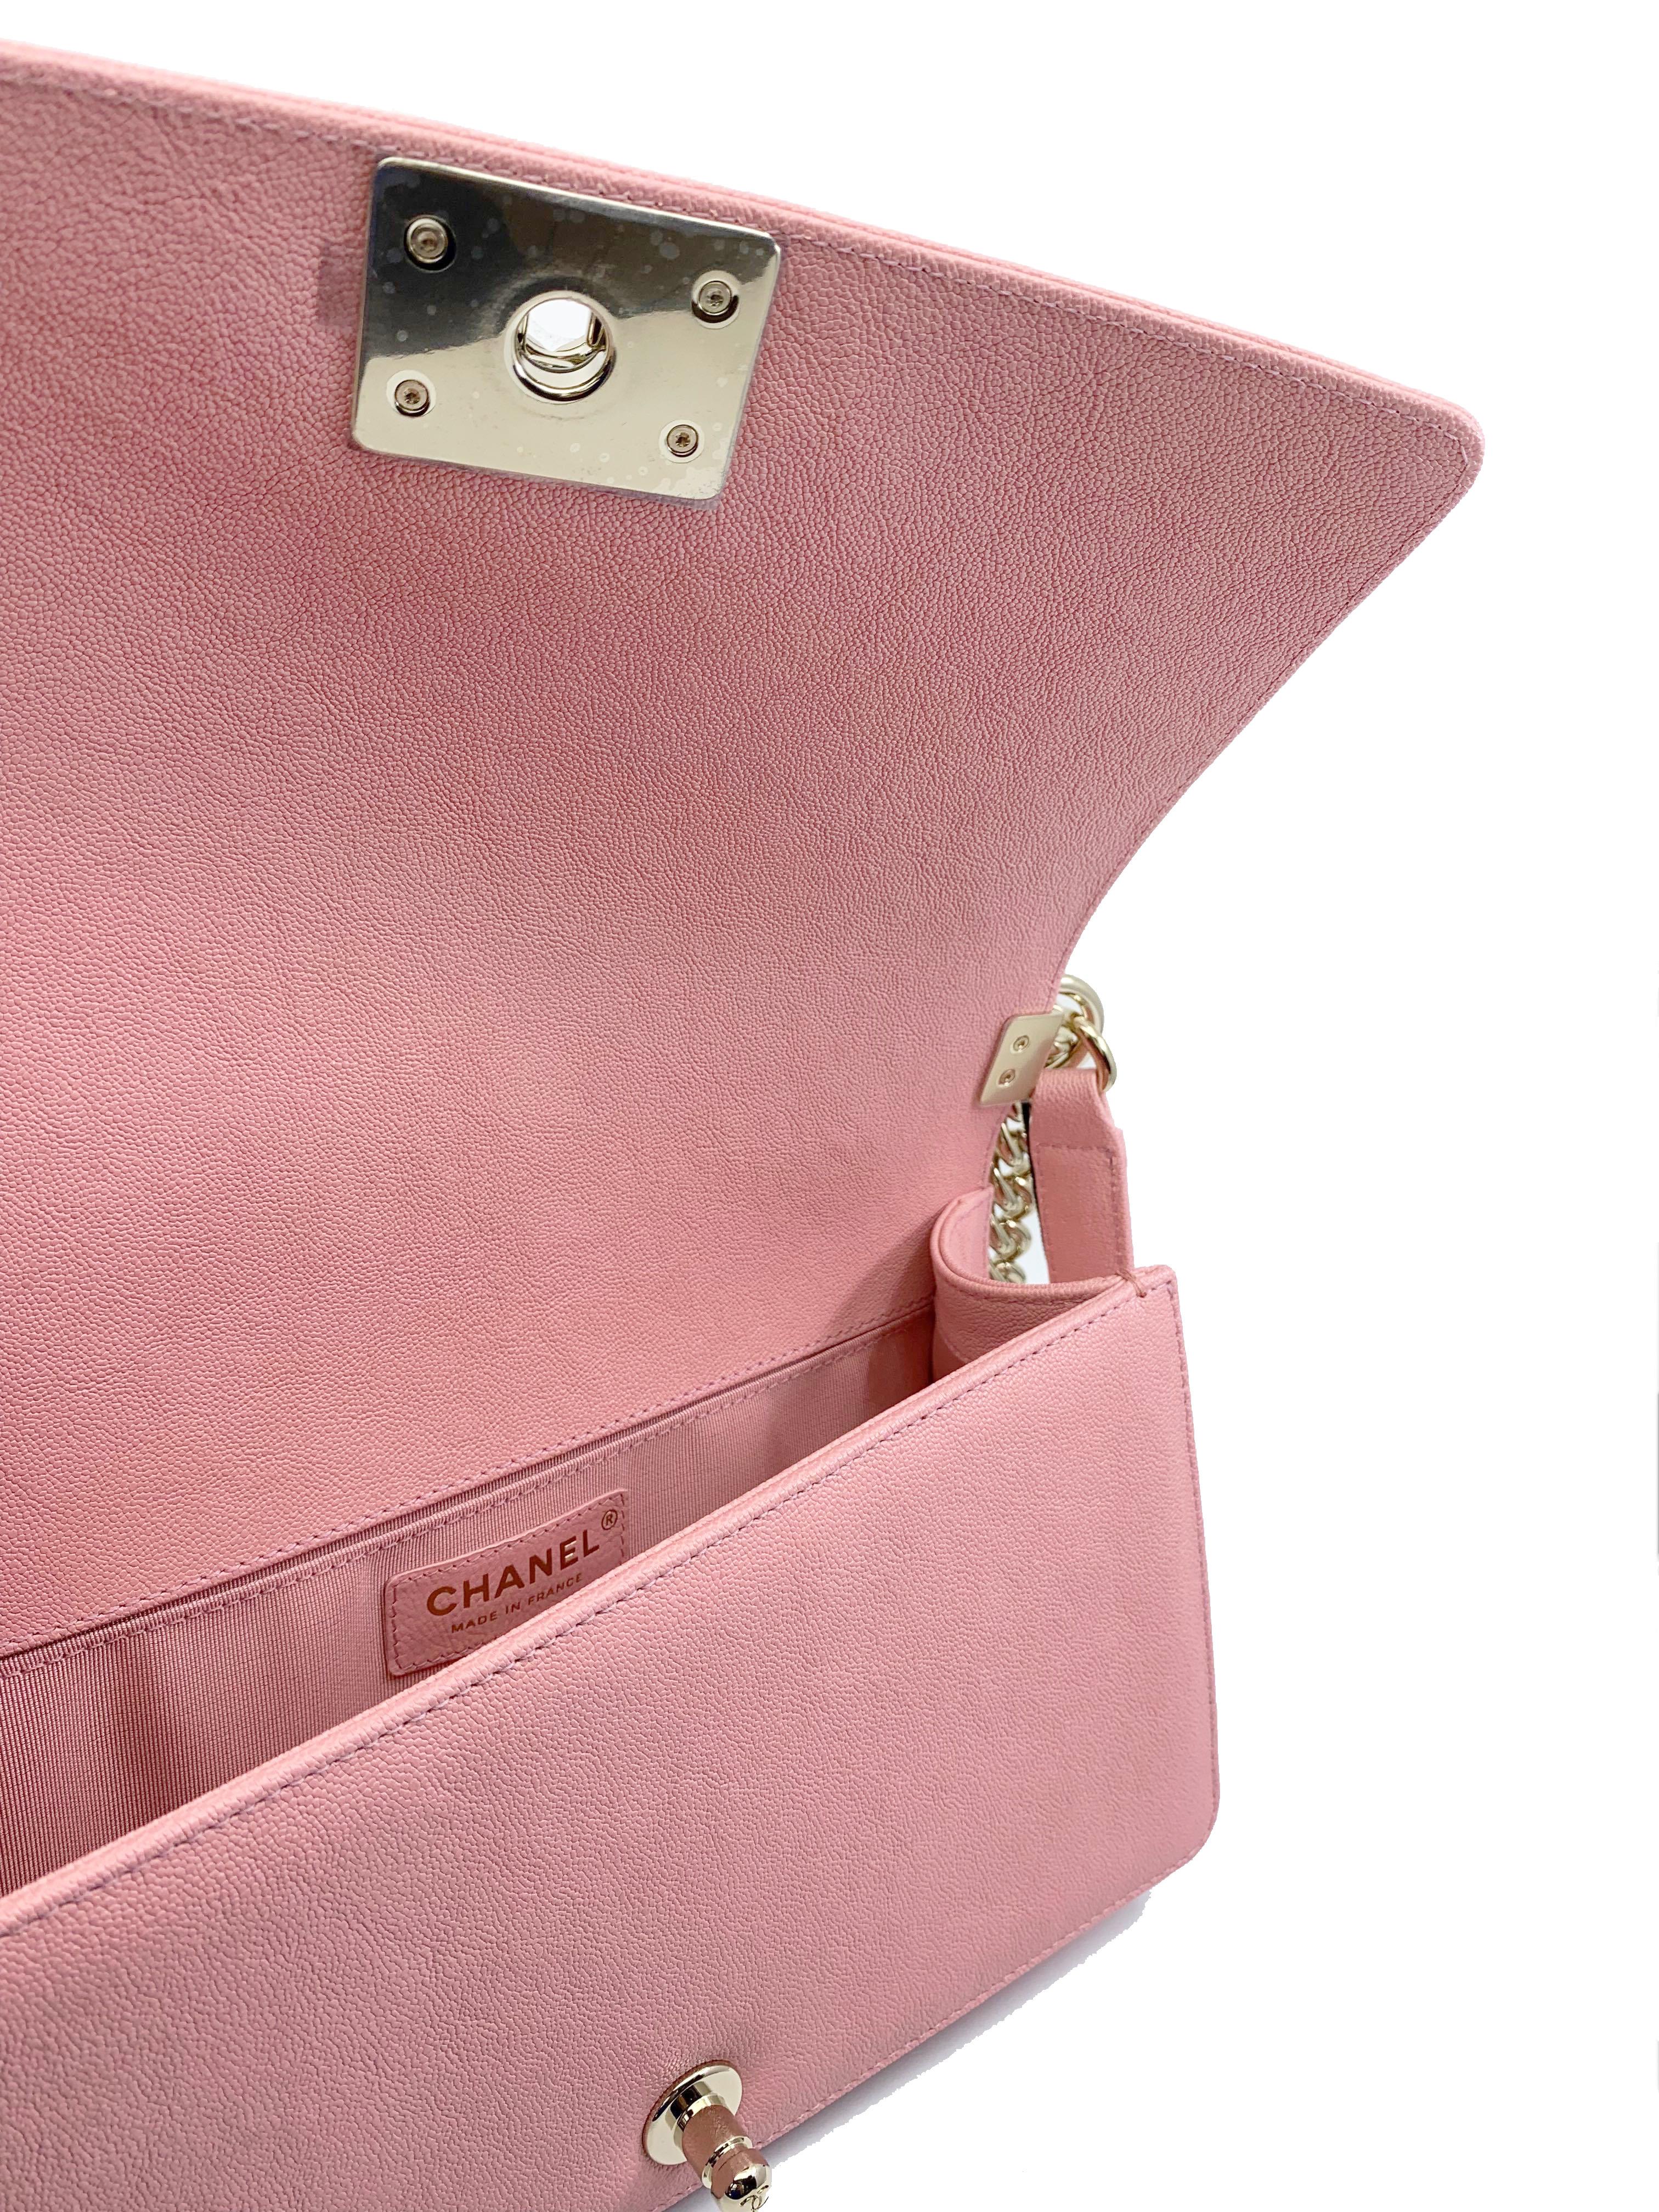 pink bag with gold chain